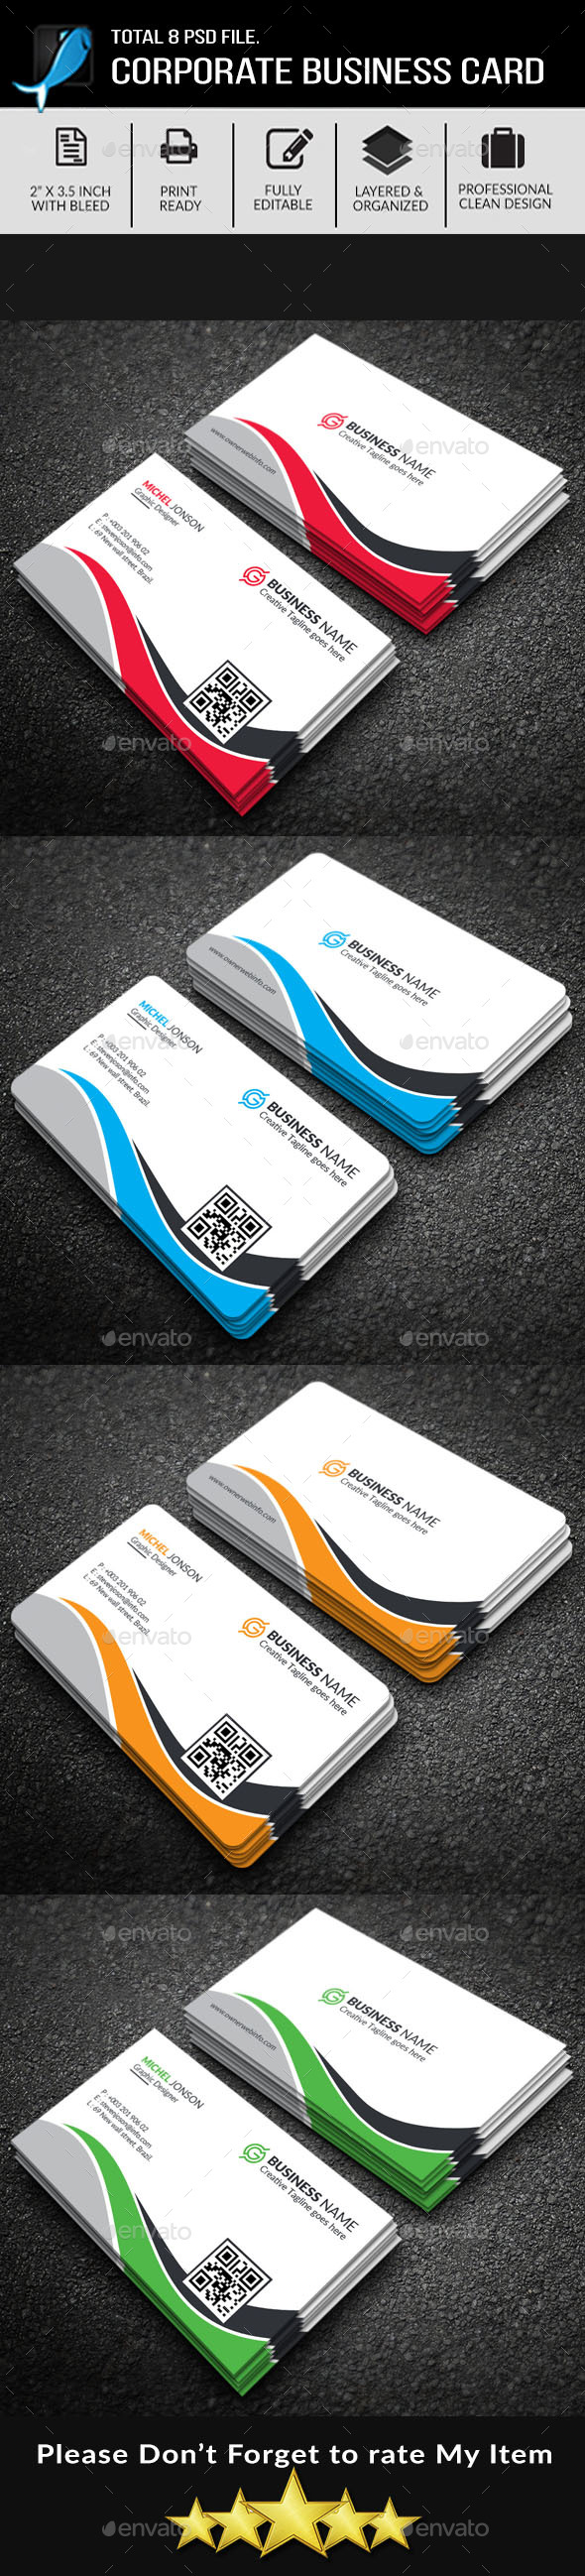 GraphicRiver Business Card 21144520